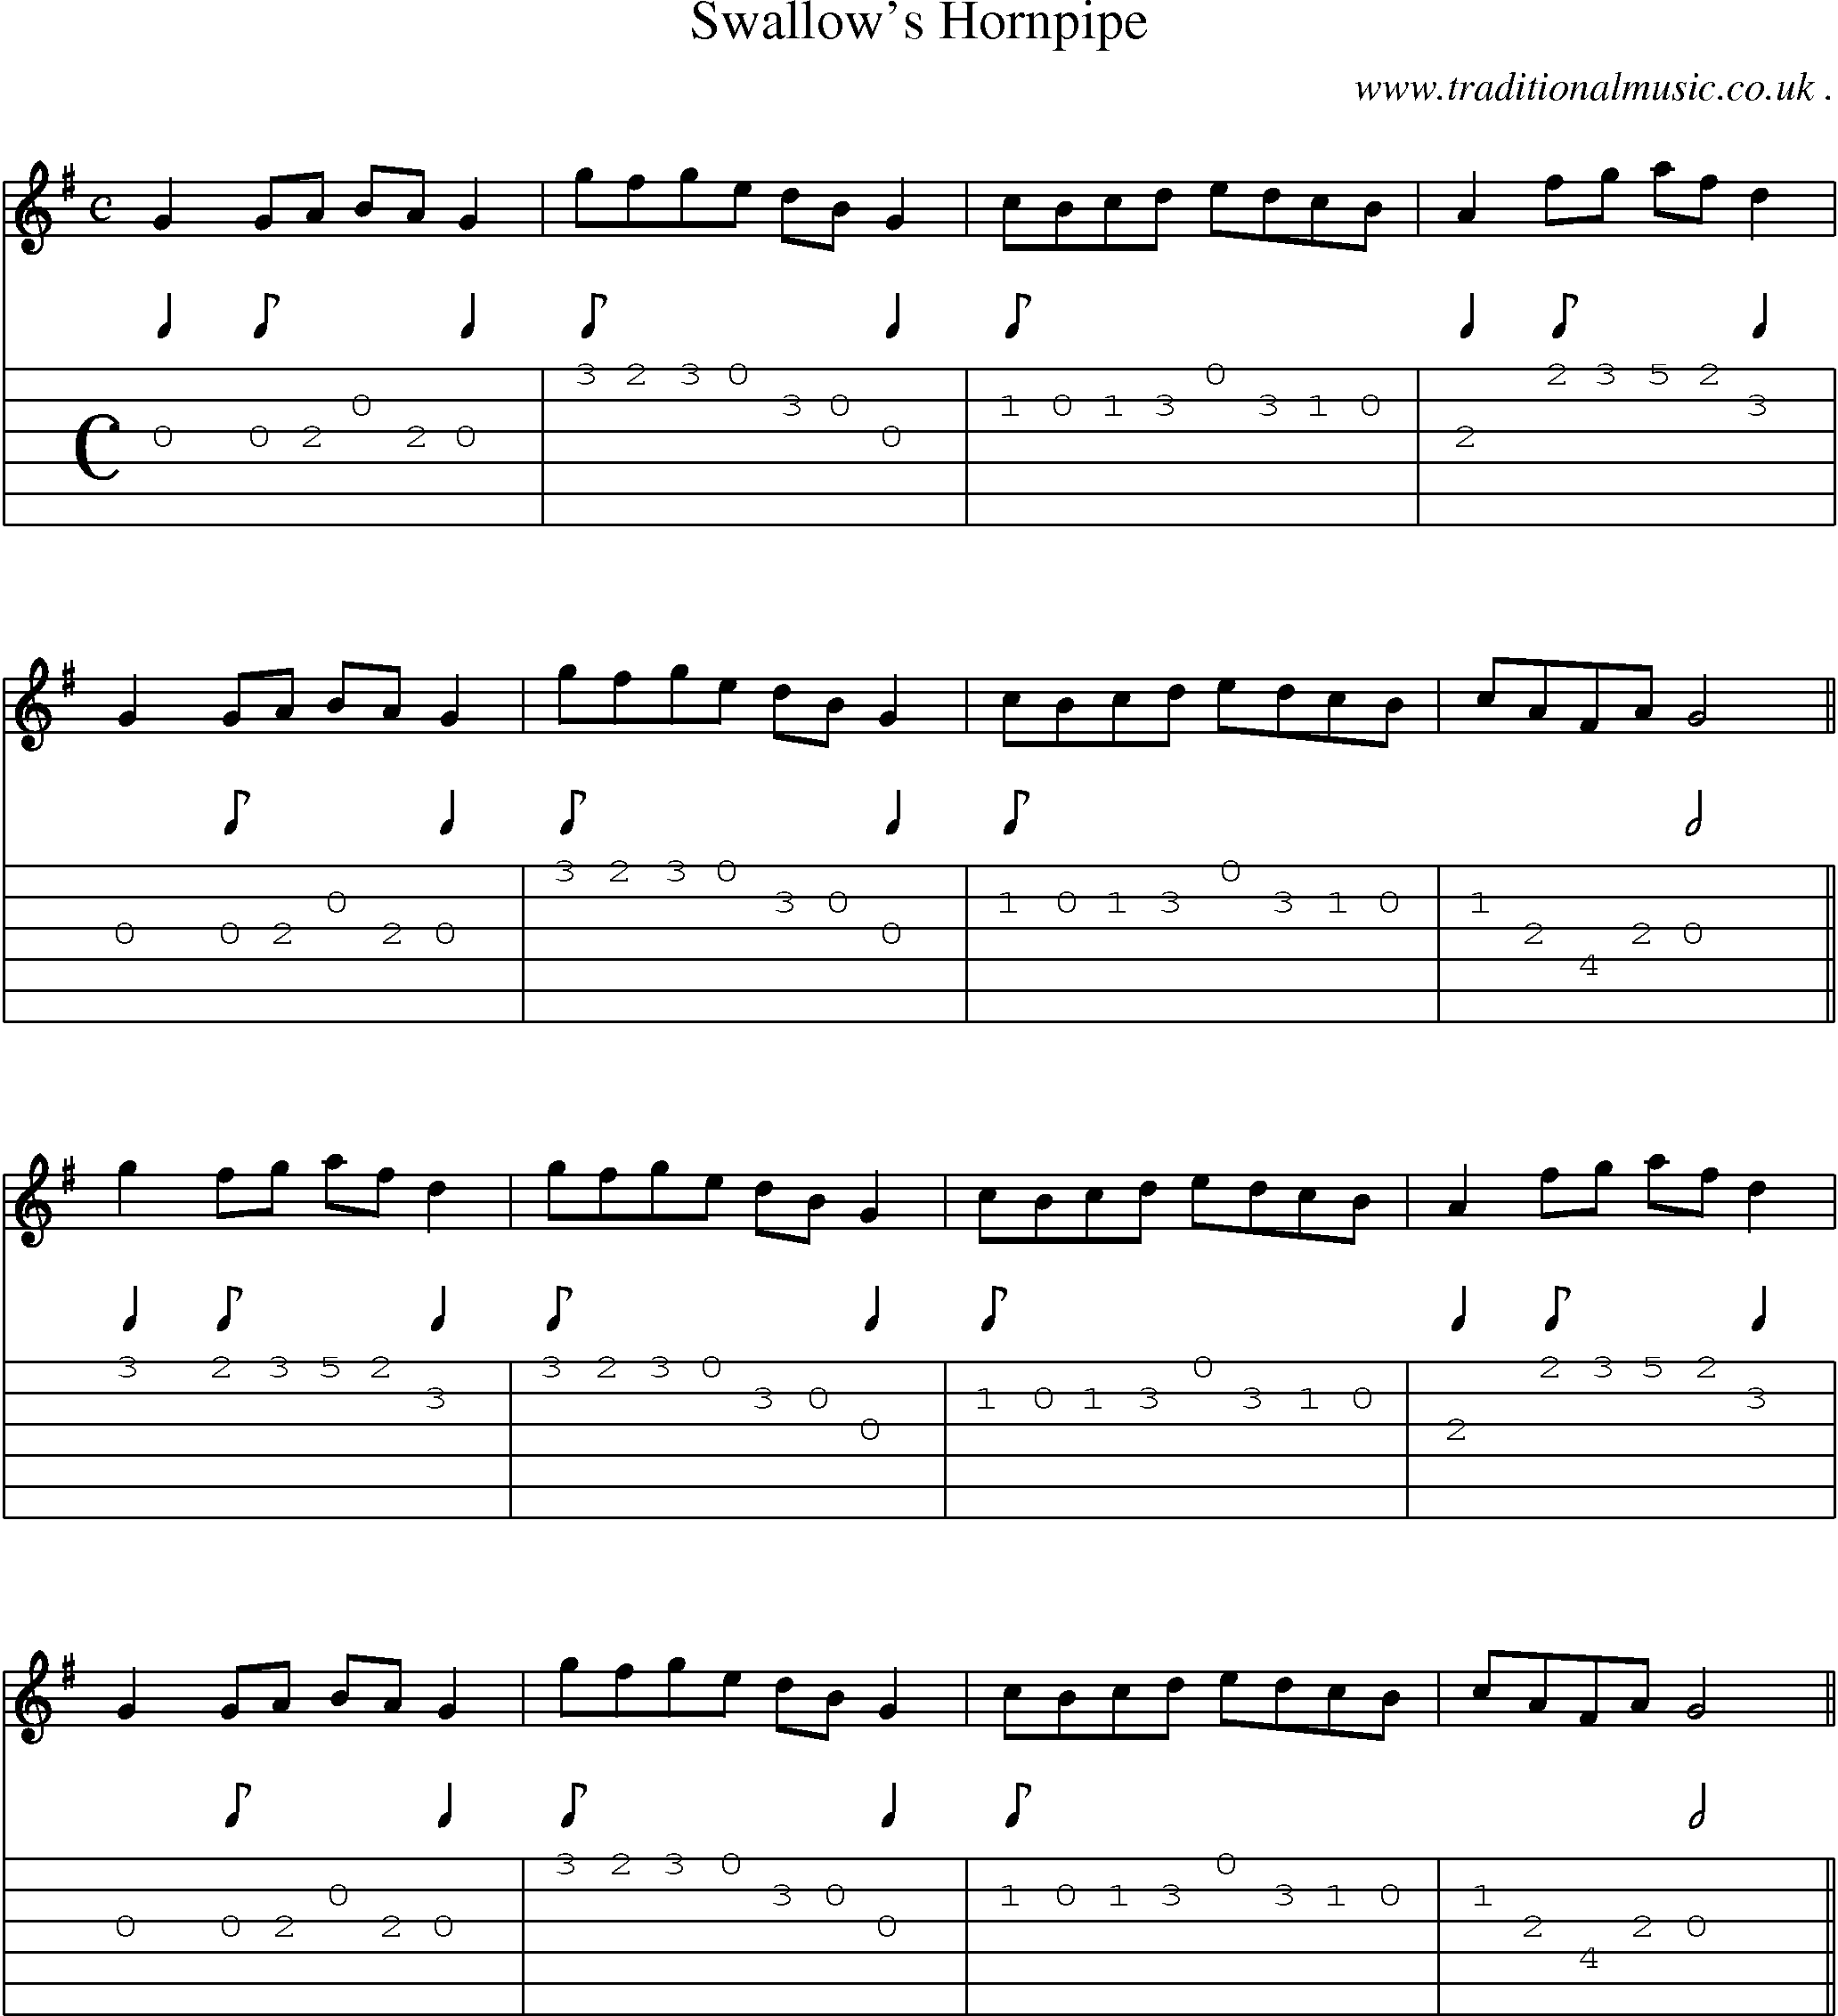 Sheet-Music and Guitar Tabs for Swallows Hornpipe